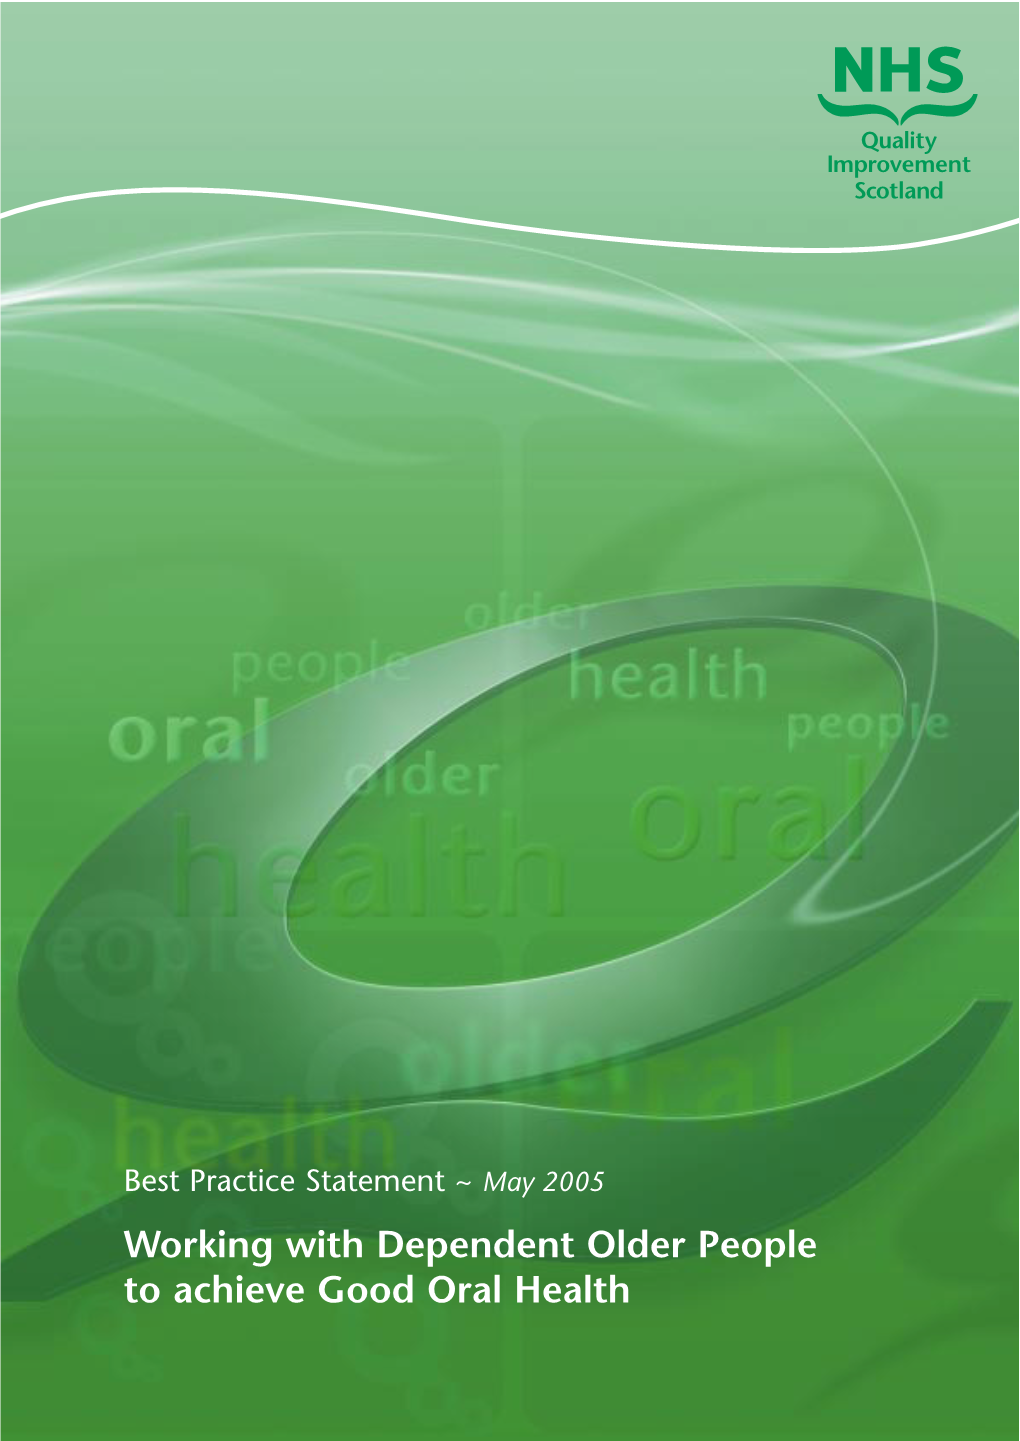 Working with Dependent Older People to Achieve Good Oral Health E-Mail: Comments@Nhshealthquality.Org Website